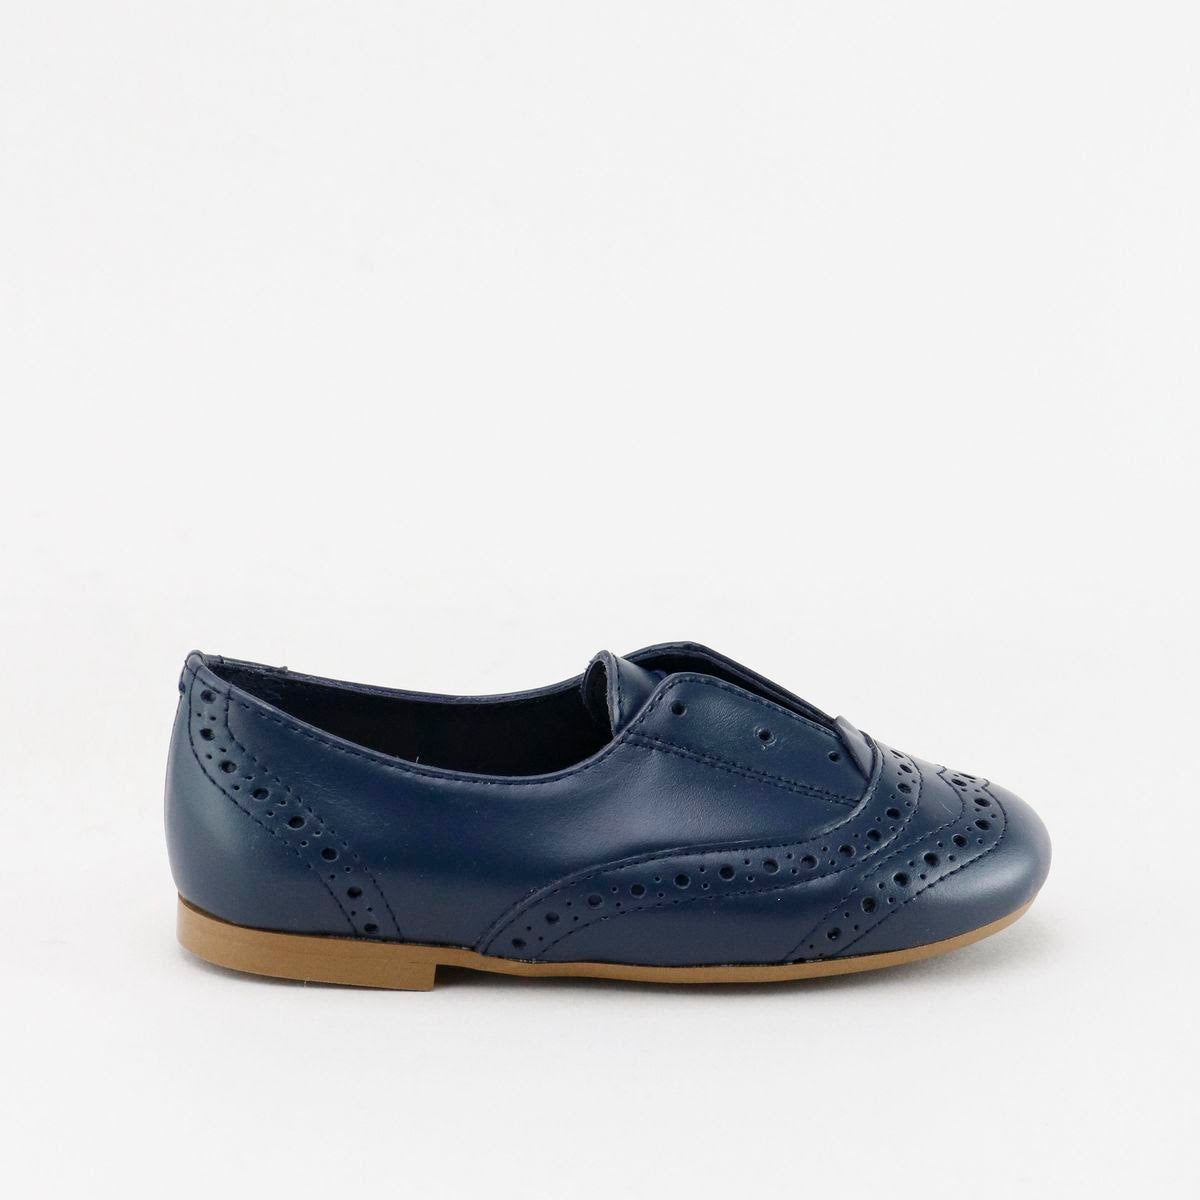 PAPANATAS NAVY DOTTED DESIGN ROUNDED SHOE